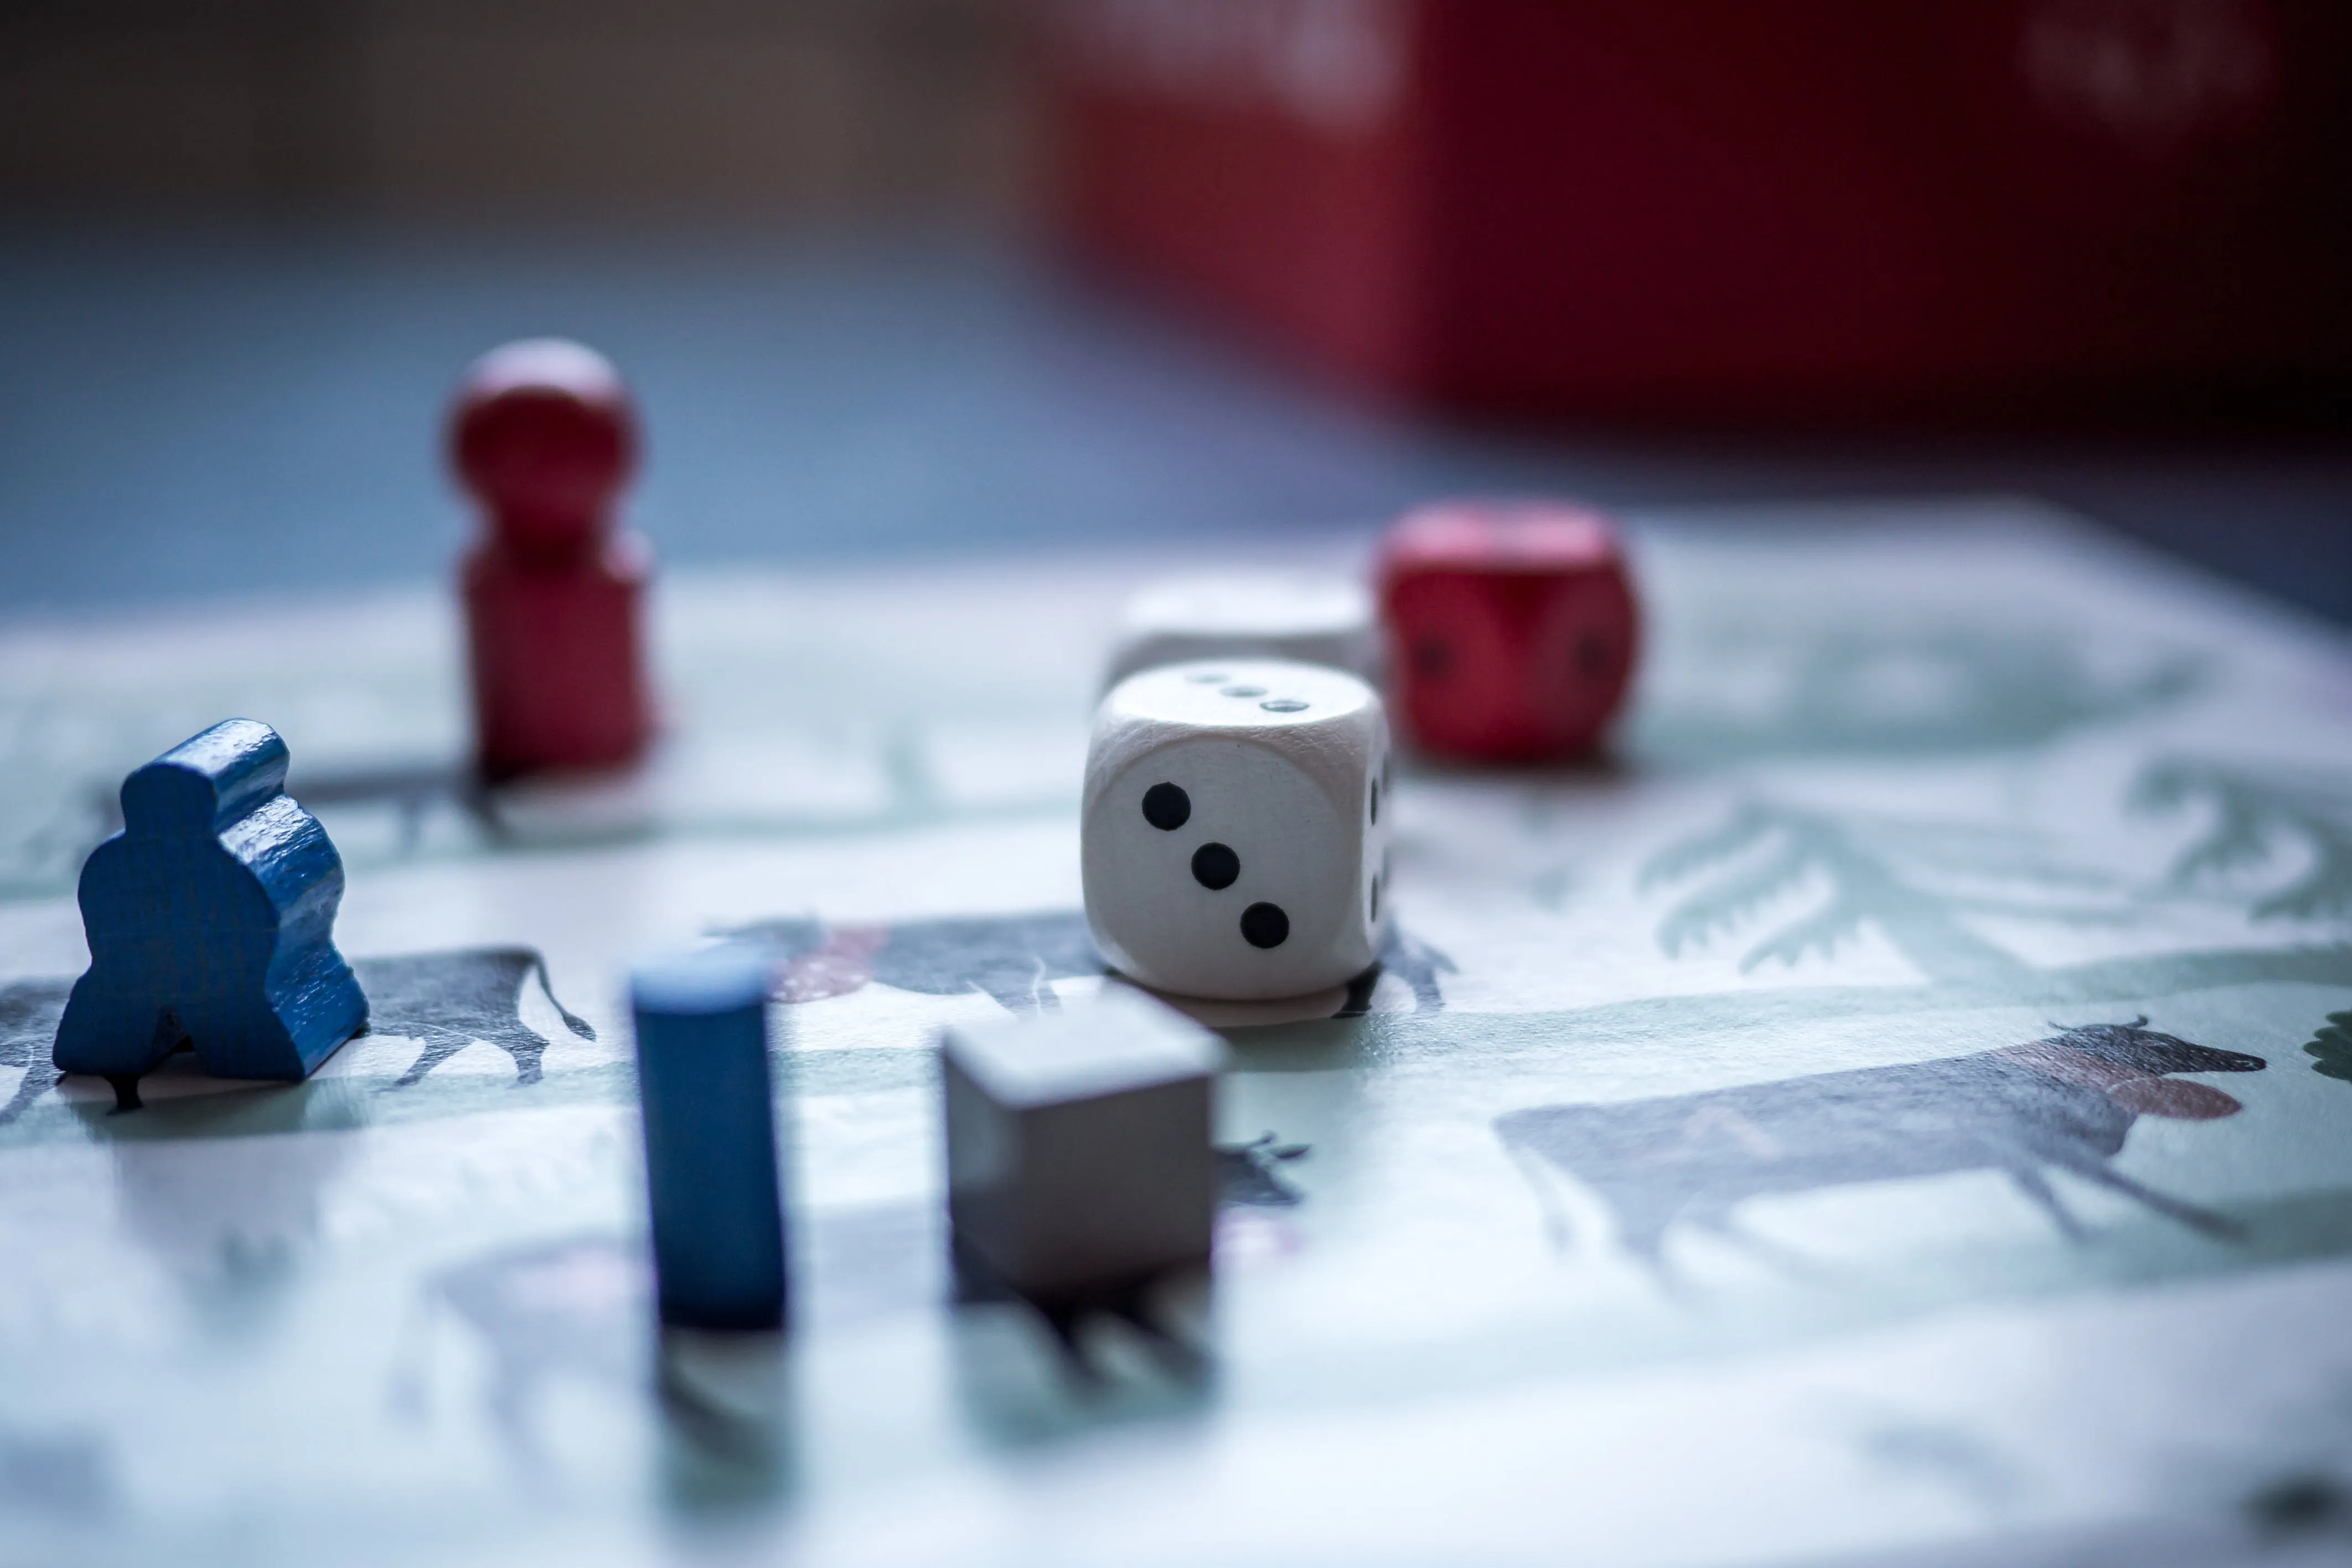 The Power of Play: The Benefits of Board Games